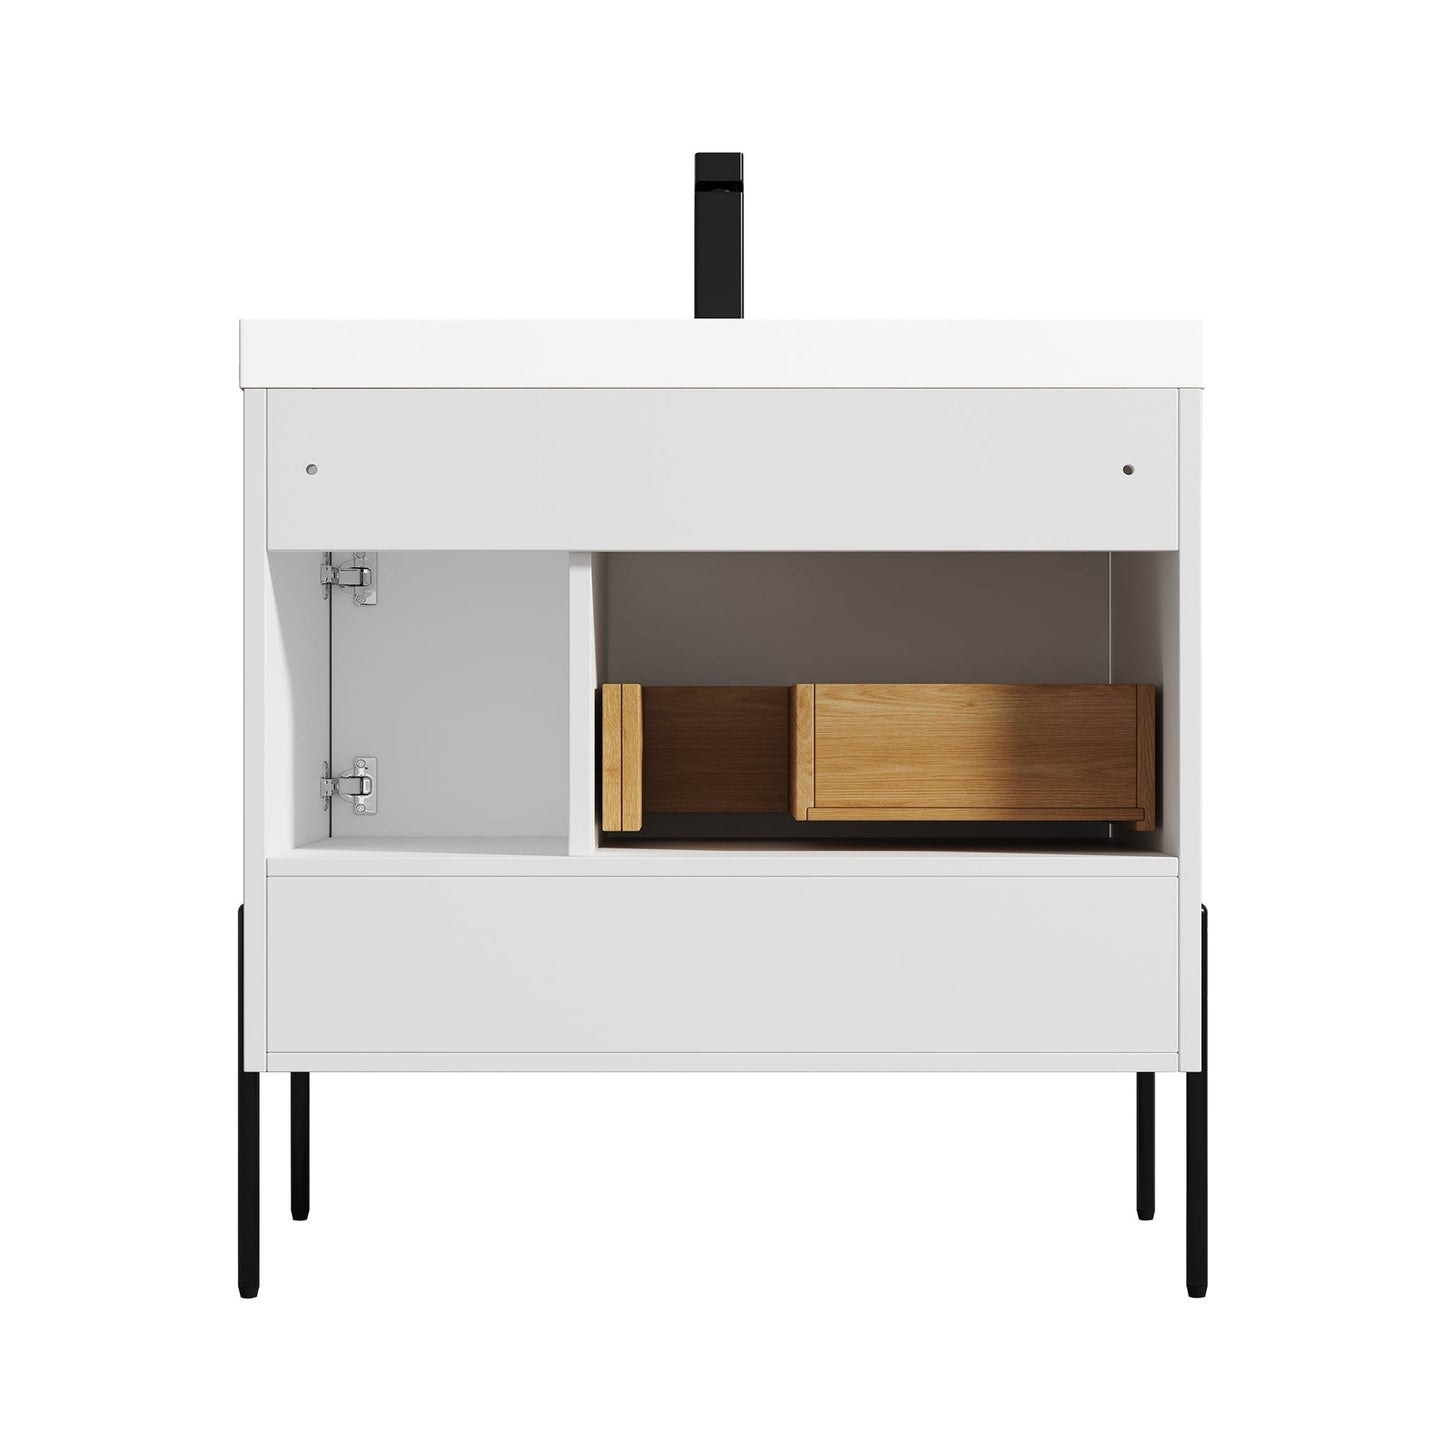 Blossom Turin 36" 1-Door 1-Drawer Matte White Freestanding Single Vanity Base With Open Shelf, Handle and Legs